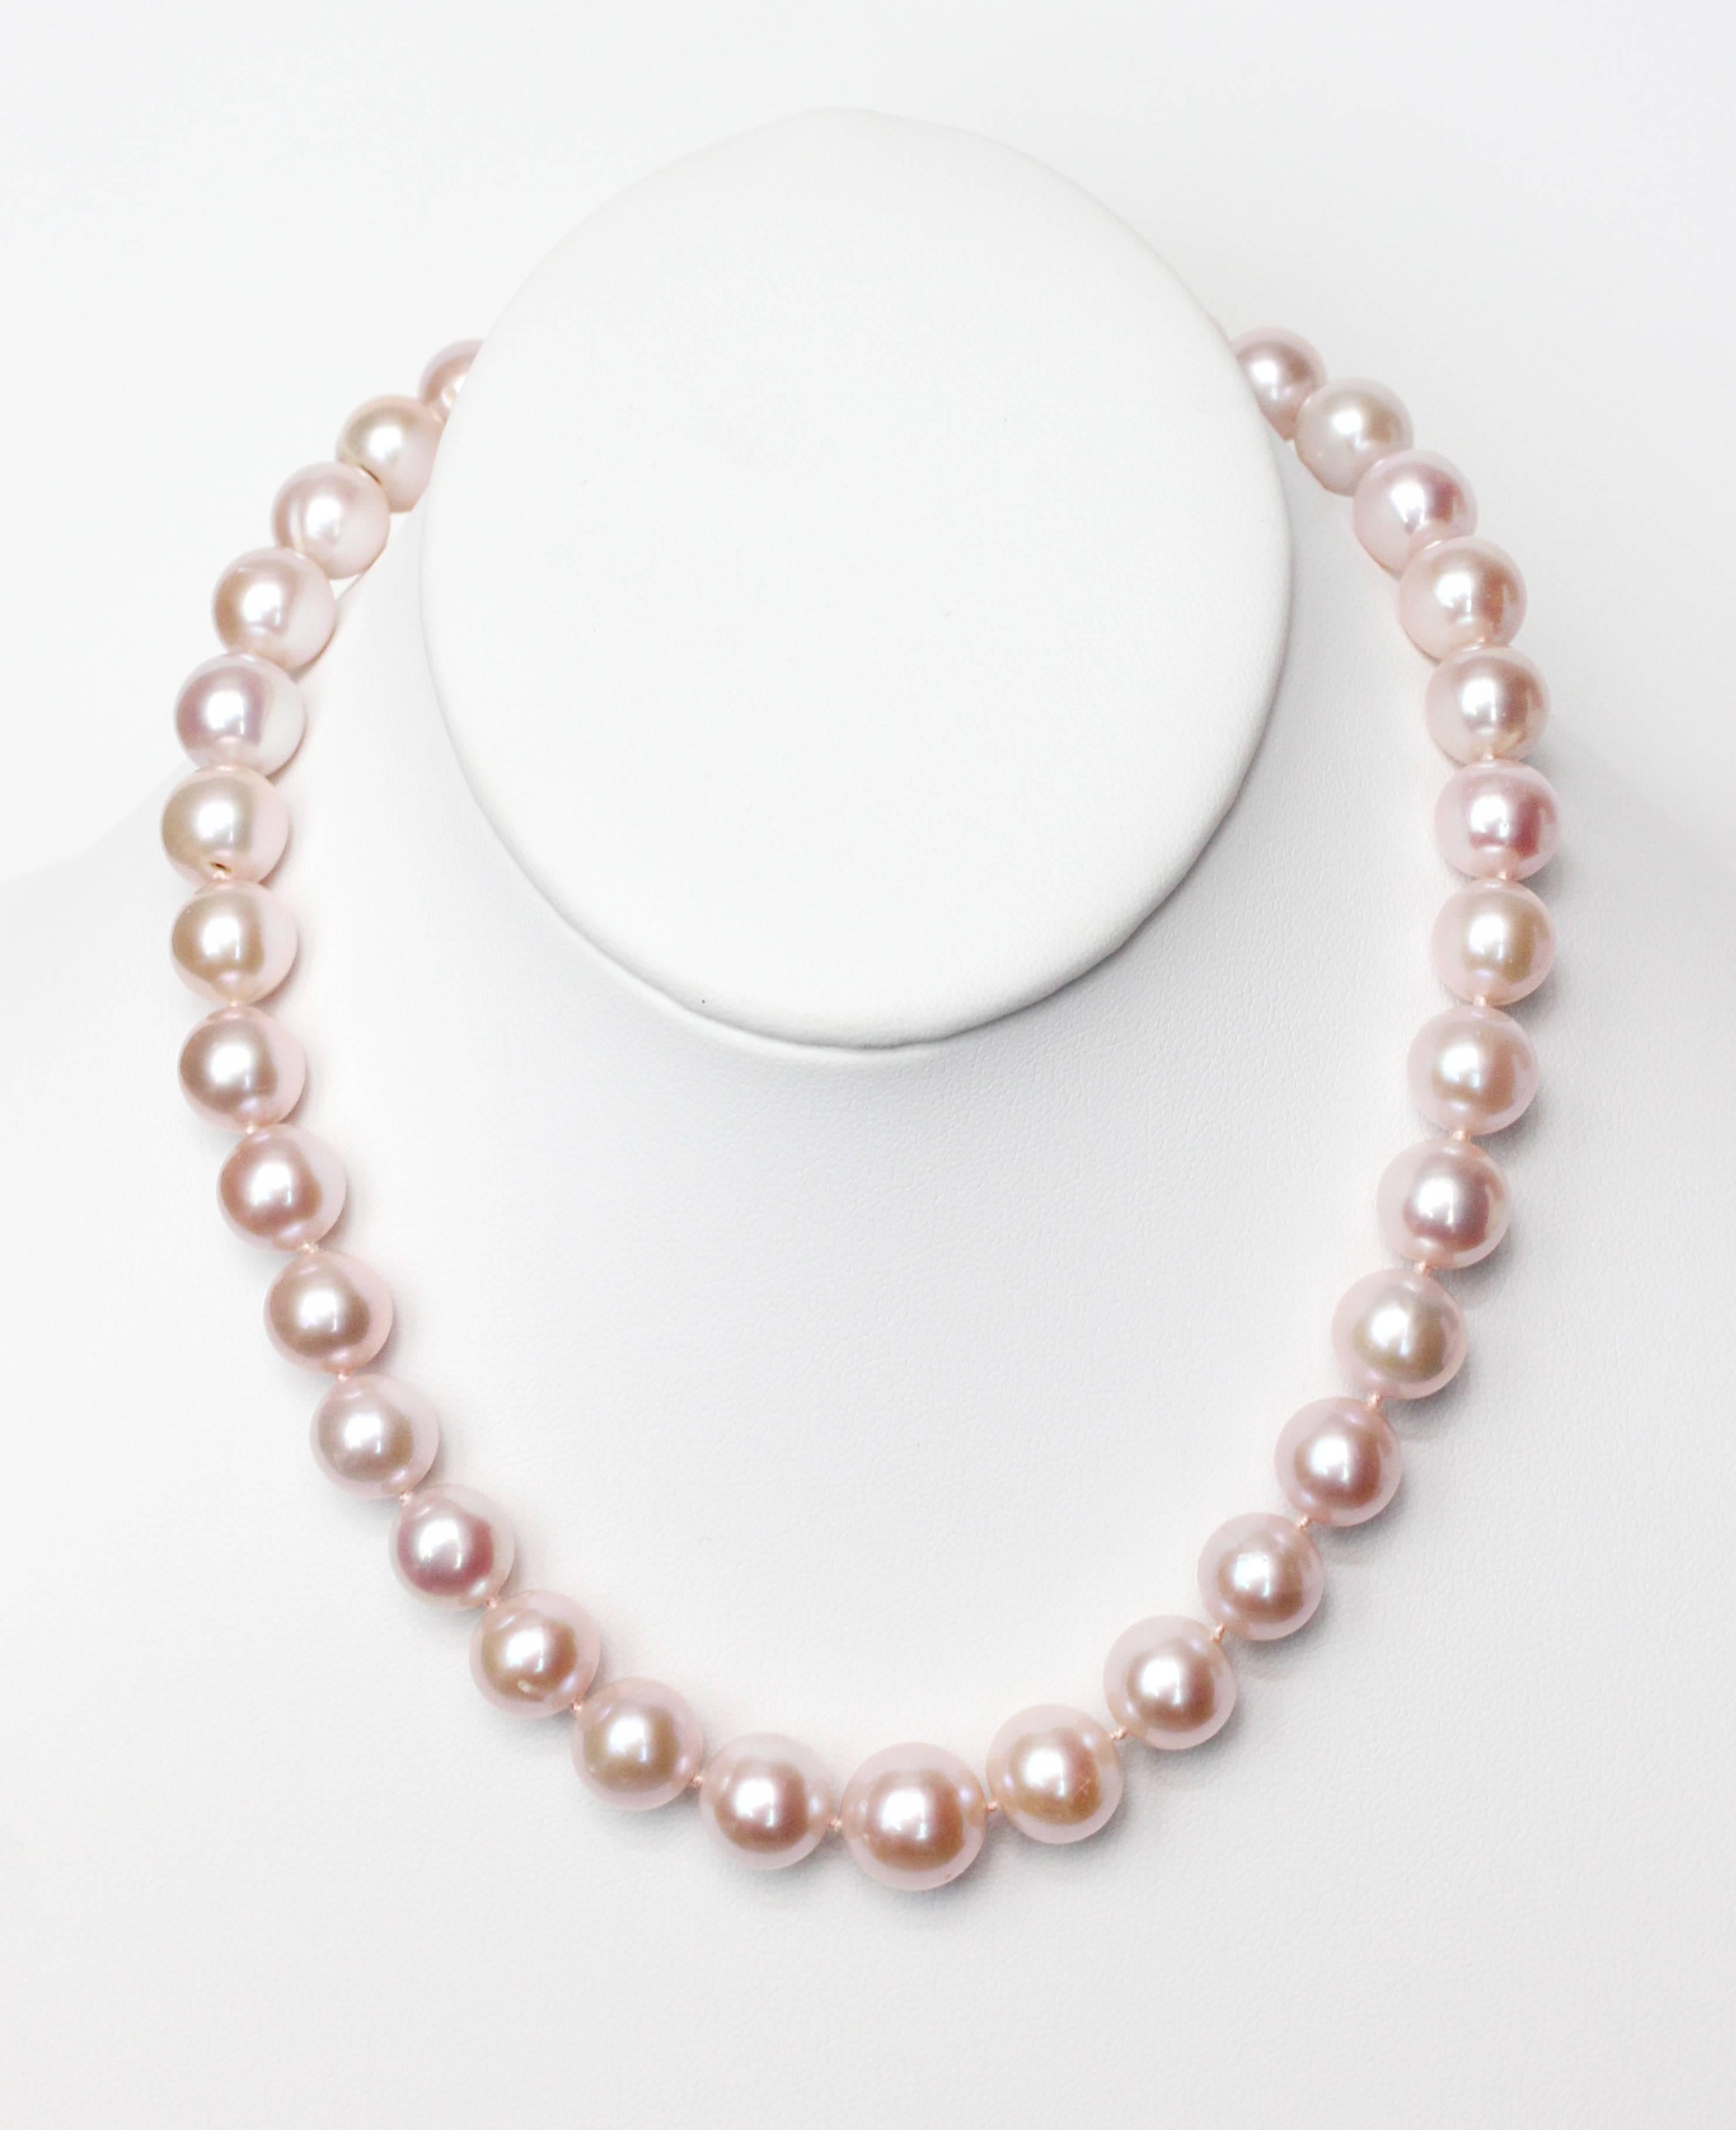 Knockout Pink Pearl single strand necklace containing 35 Fresh Water Pearls (11.2mm-12.6mm) with an 18kt Gold and Diamond ball clasp closure.  16 1/2" length.  Party time.

Designed and made in house by Julius Cohen New York.